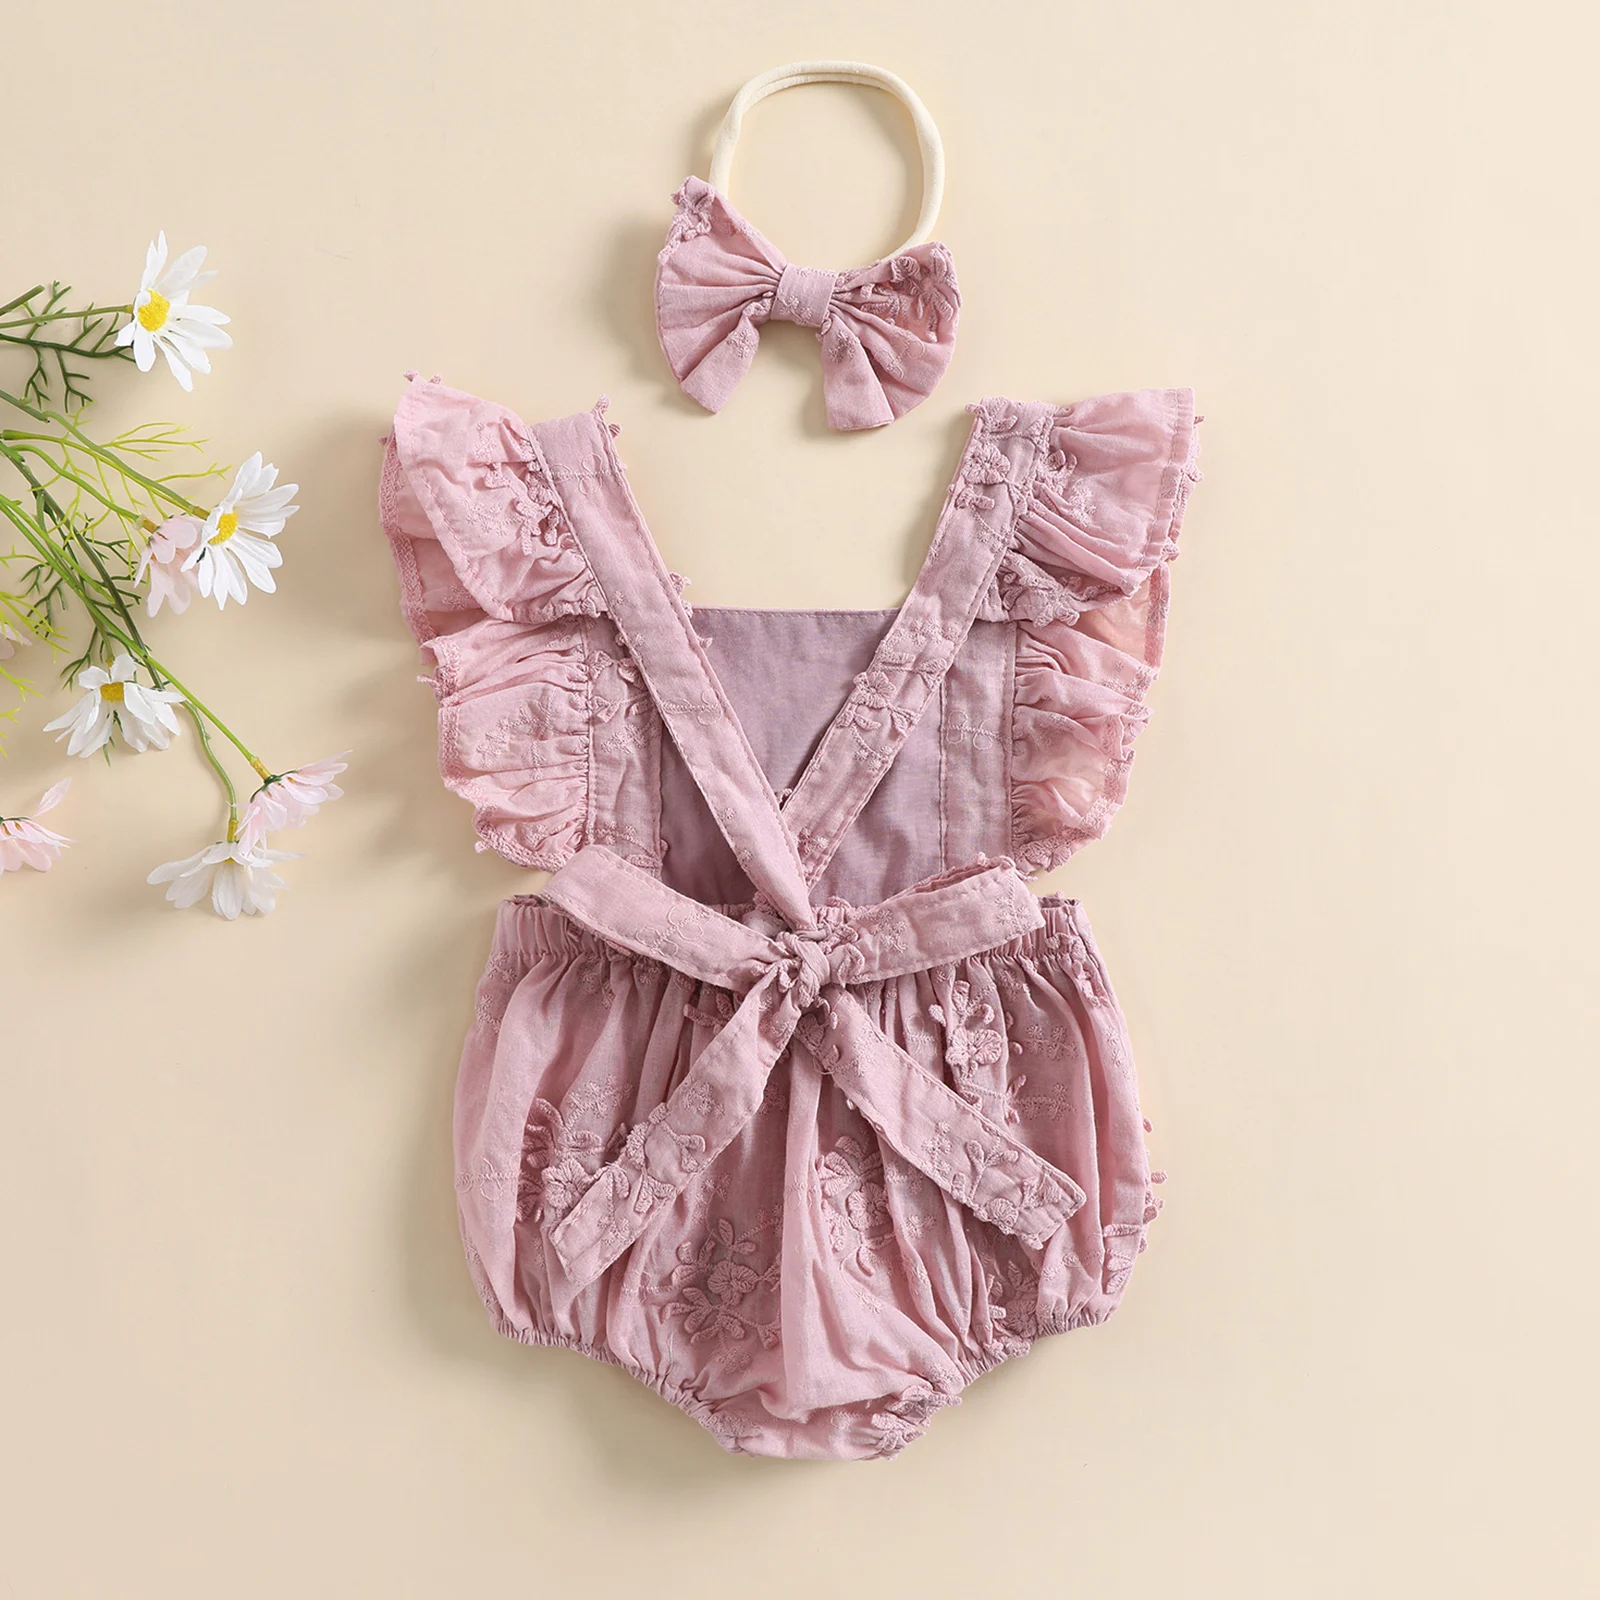 Baby Bodysuits expensive Newborn Baby Girls Summer Romper with Headband Toddler Lovely 2pcs Clothes Suit Fly Sleeves Lace Tie-Up Backless Jumpsuit Baby Bodysuits expensive